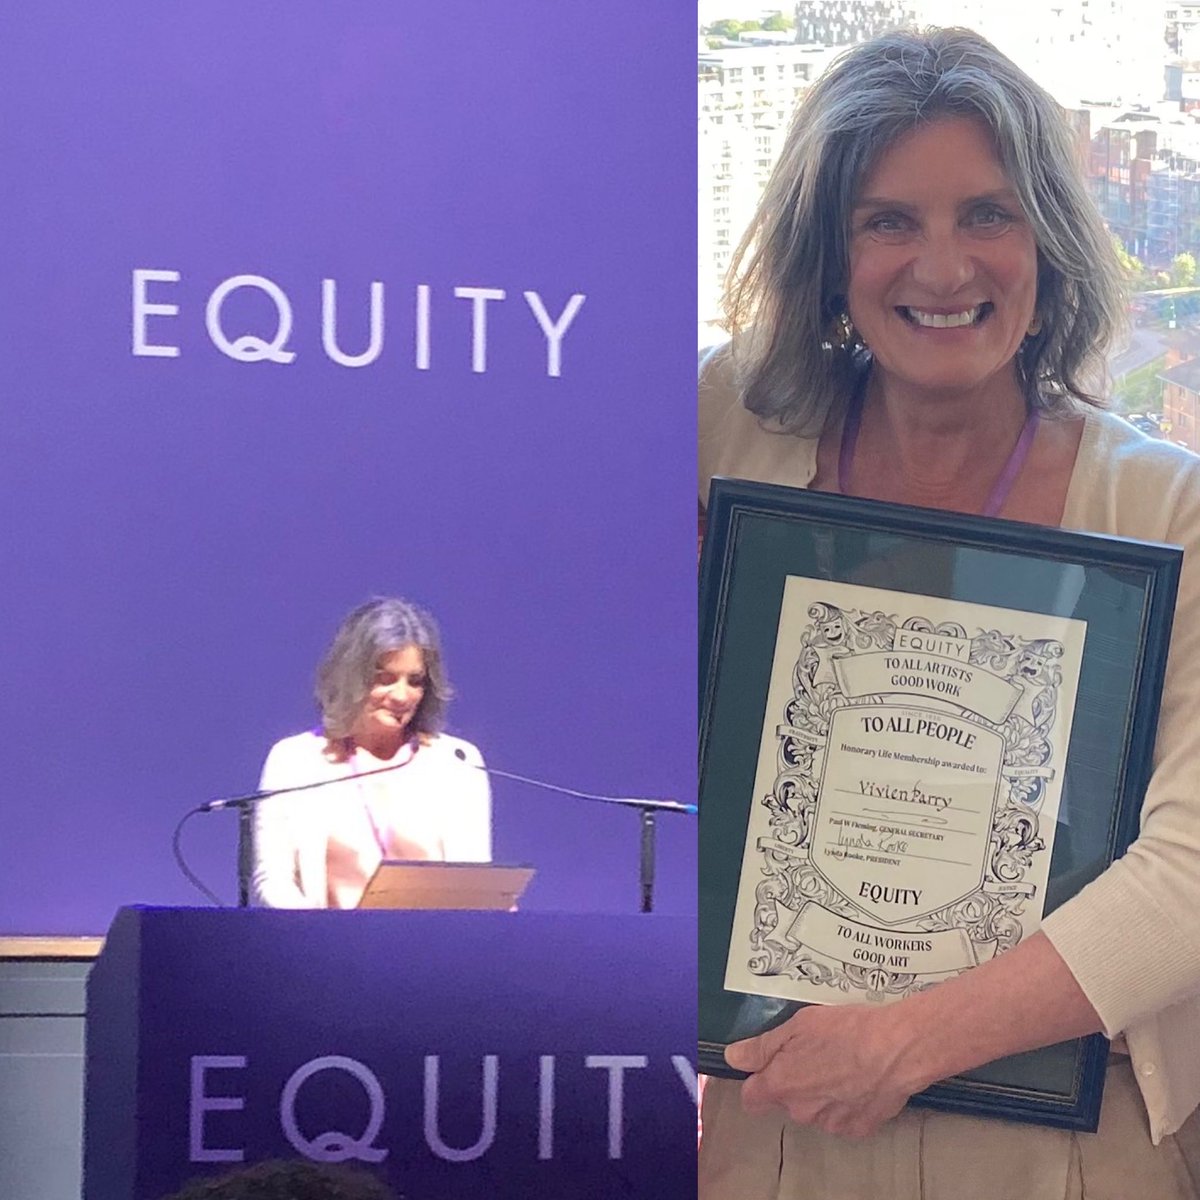 ⁦I was honoured to attend ⁦@EquityUK⁩ conference this weekend and gobsmacked to be presented with Honorary Lifelong Membership in recognition for my services to the Union and its members. I am so grateful and proud to be an activist. We make a bloody difference.